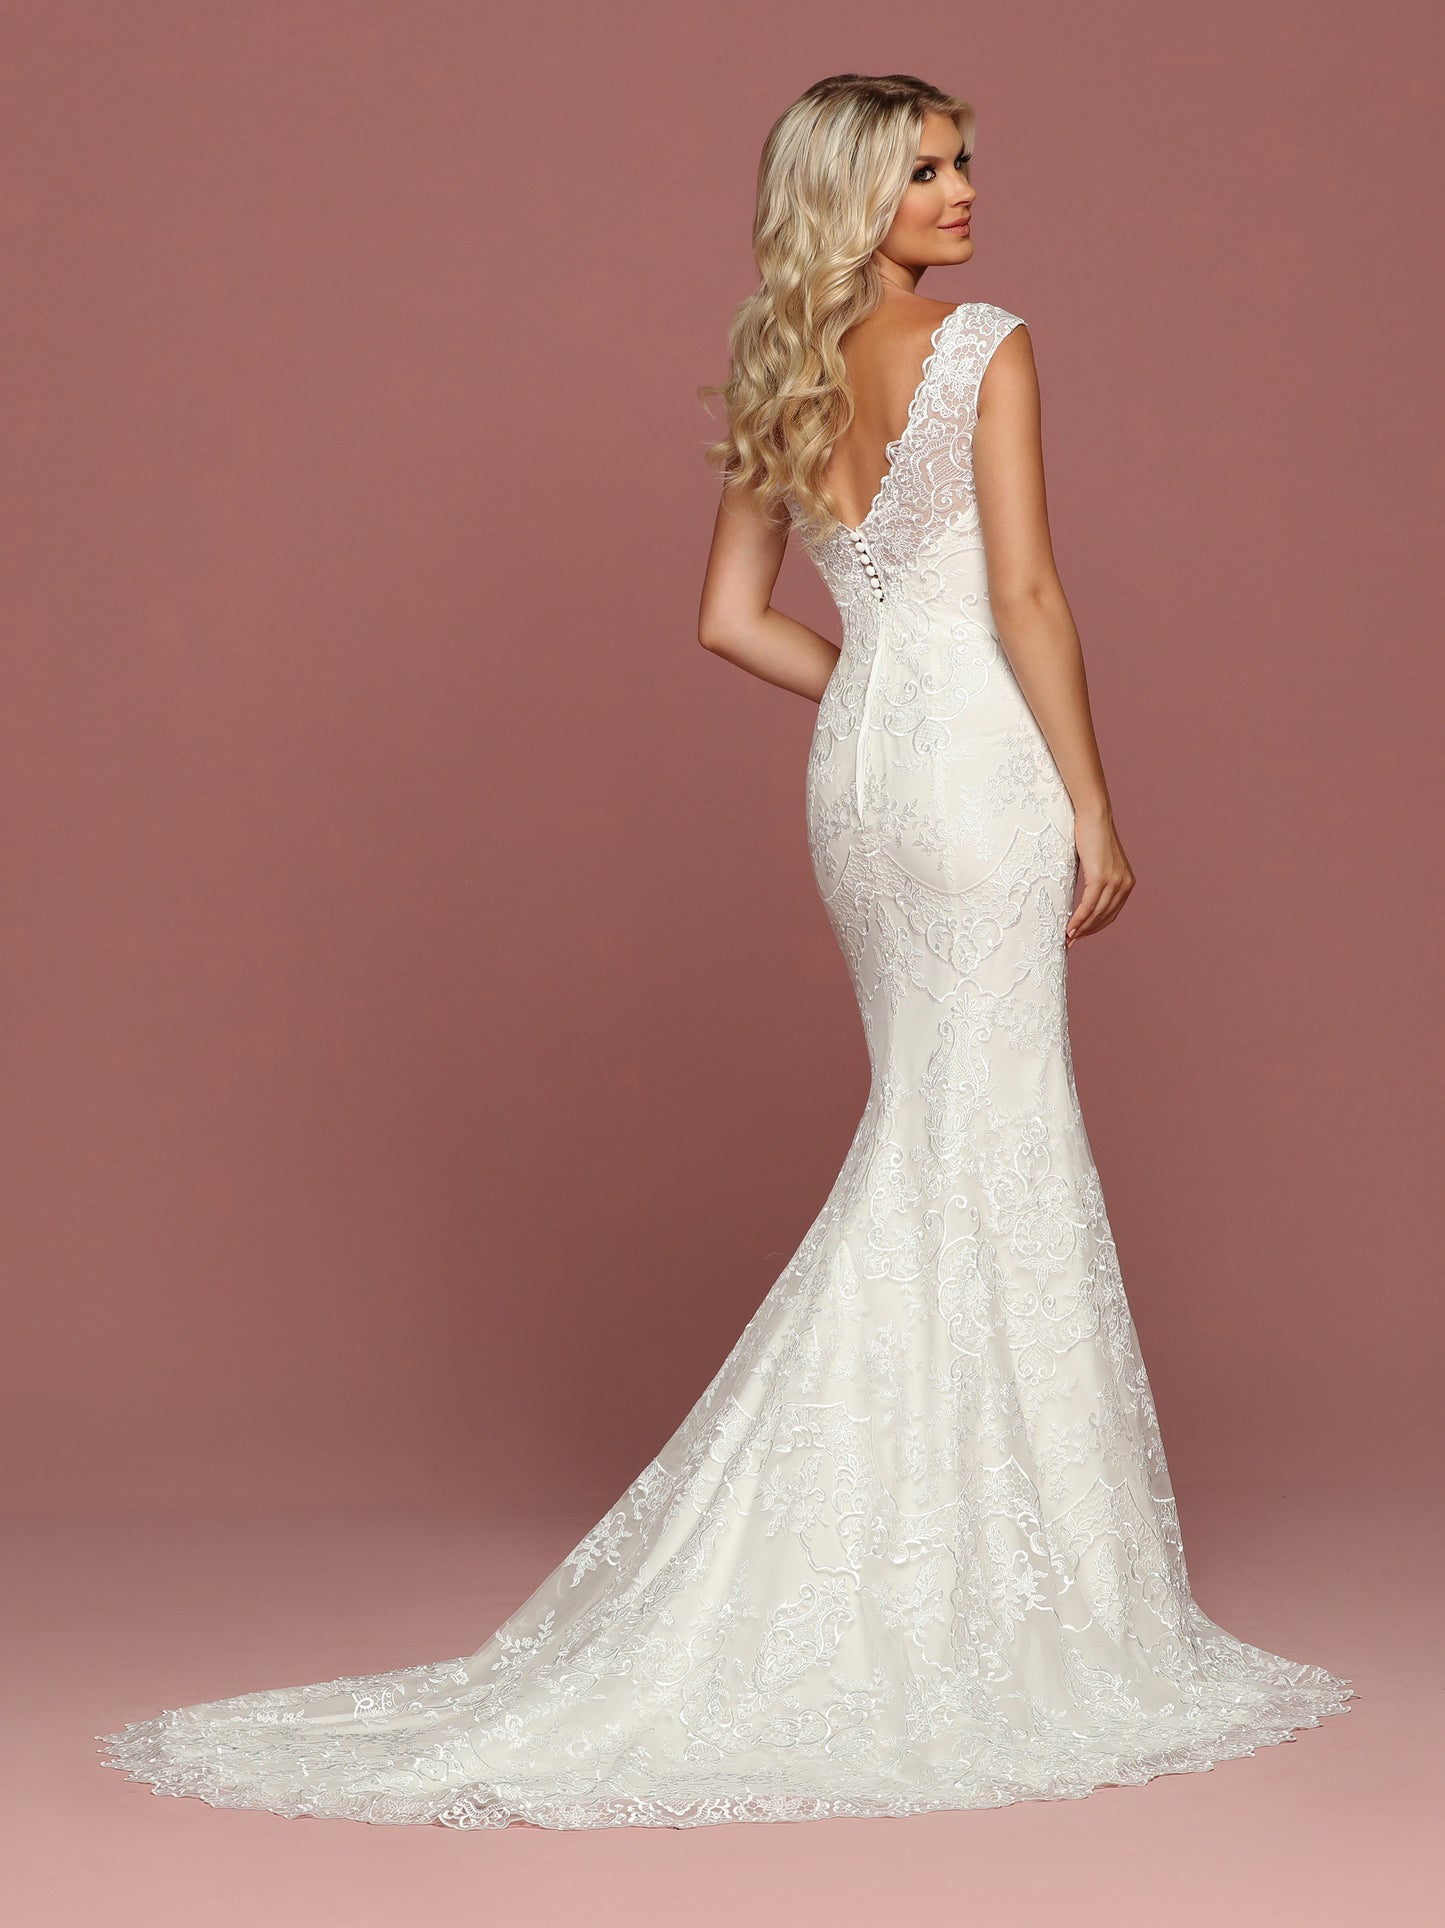 Davinci Bridal 50507 is a Tulle & Lace Fit & Flare Wedding Dress features a Deep V-Neckline, Wide Sheer Lace Straps, V-Back & Covered Buttons. Skirt finishes with Scalloped Lace Hem & Chapel Train.  Available for 1-2 Week Delivery!!!  Available Sizes: 2,4,6,8,10,12,14,16,18,20  Available Colors: Ivory